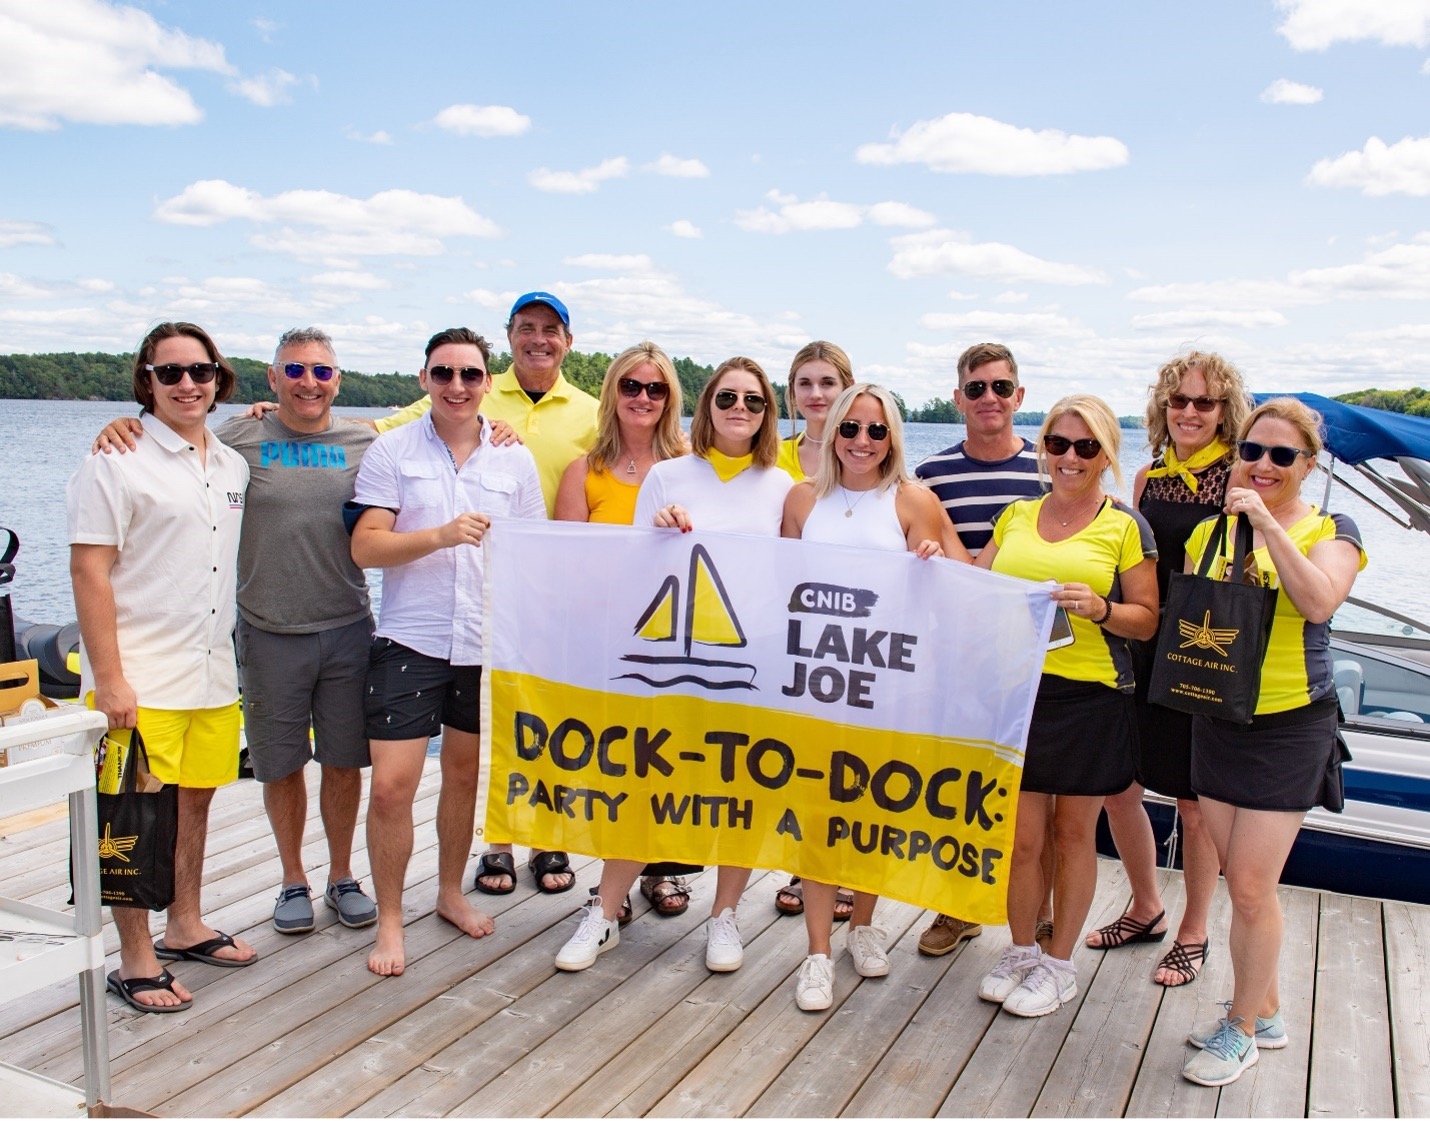  A group of event volunteers on the CNIB Lake Joe dock holding a "CNIB Lake Joe Dock-to-Dock: Party with a Purpose" flag